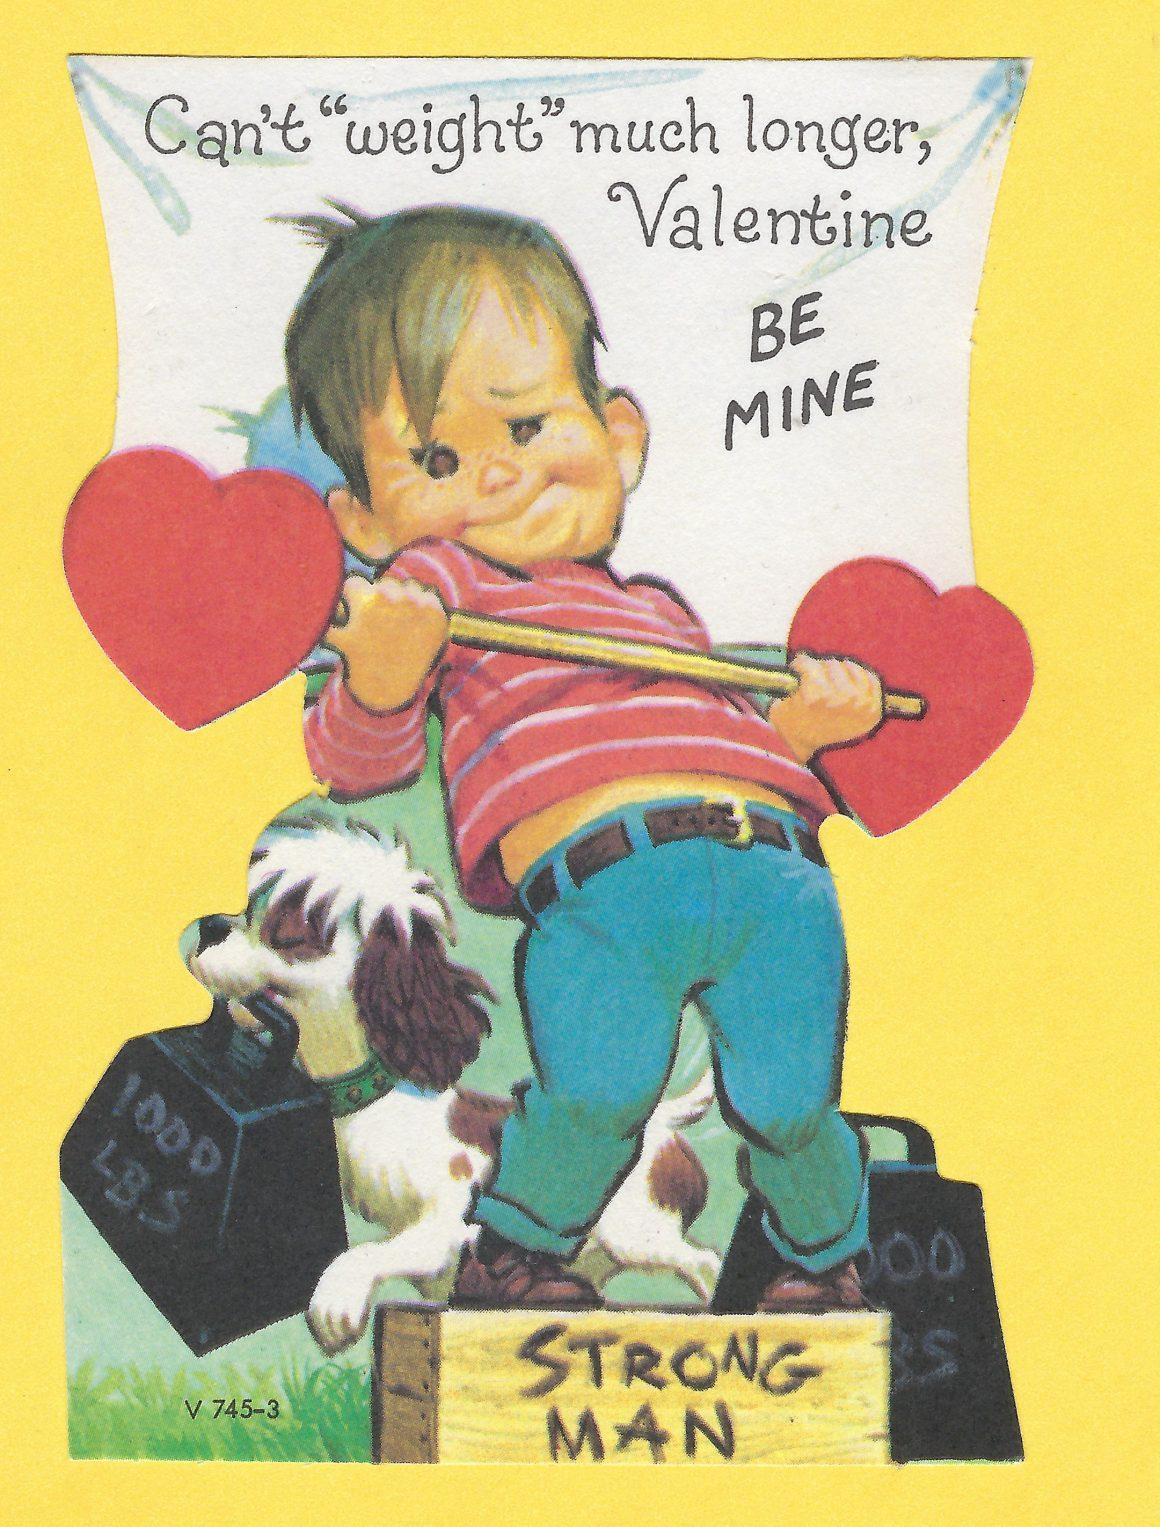 Valentine's Day greeting card with a boy pretending to be a strongman, and attempting to lift a barbell with heart-shaped plates with the caption: Can't "weight" much longer, Valentine, Be Mine.